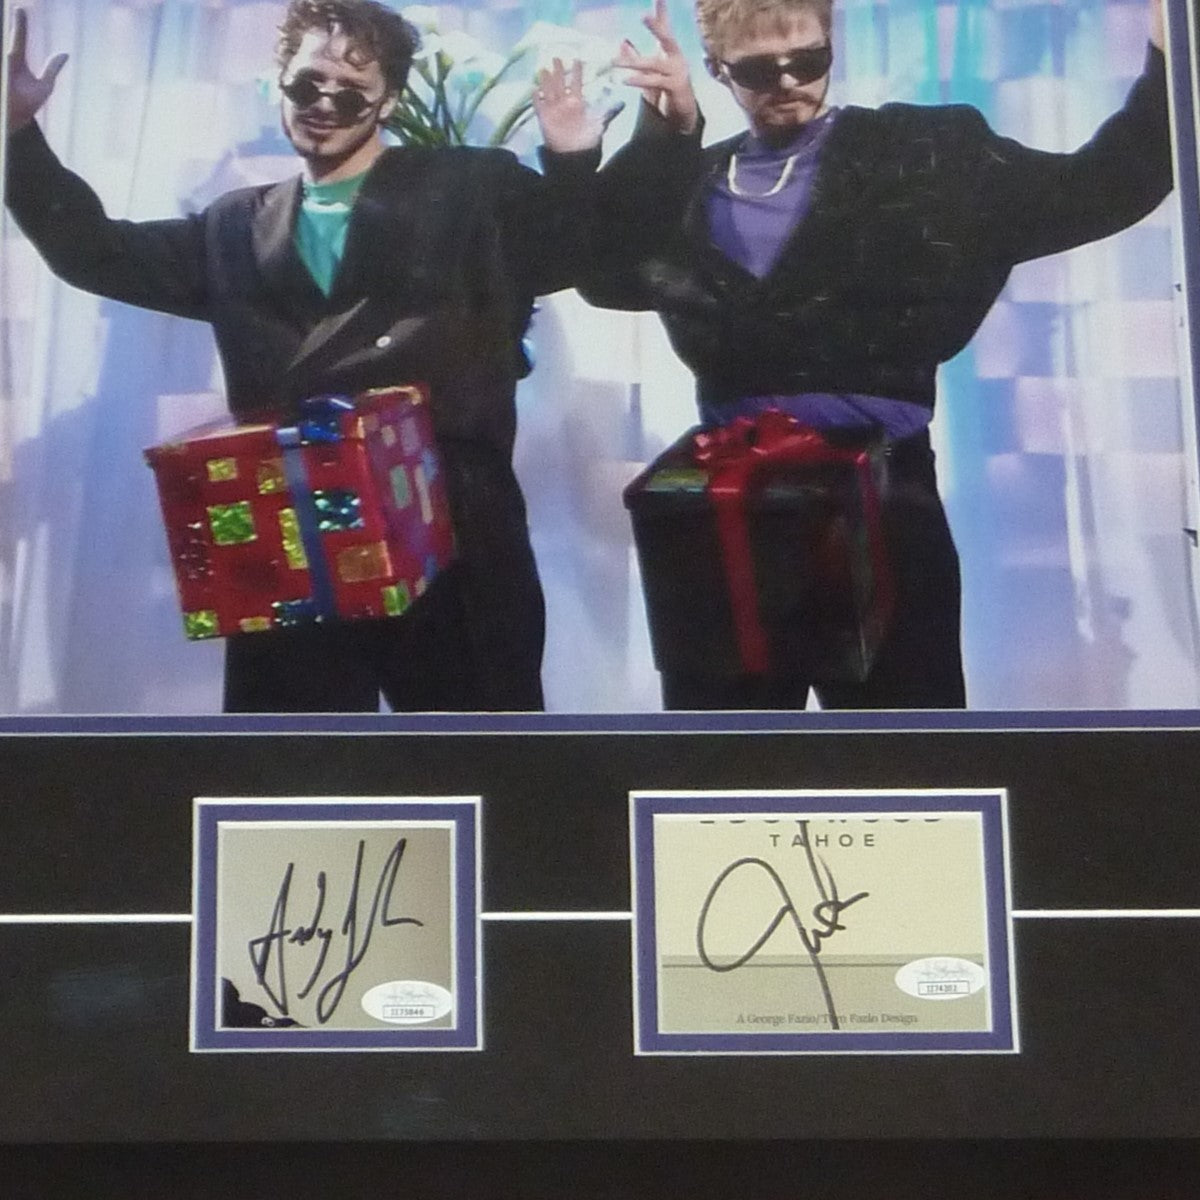 Justin Timberlake And Andy Samberg Dual Autographed SNL "D*CK IN A BOX" 11x14 Deluxe Framed Piece - JSA